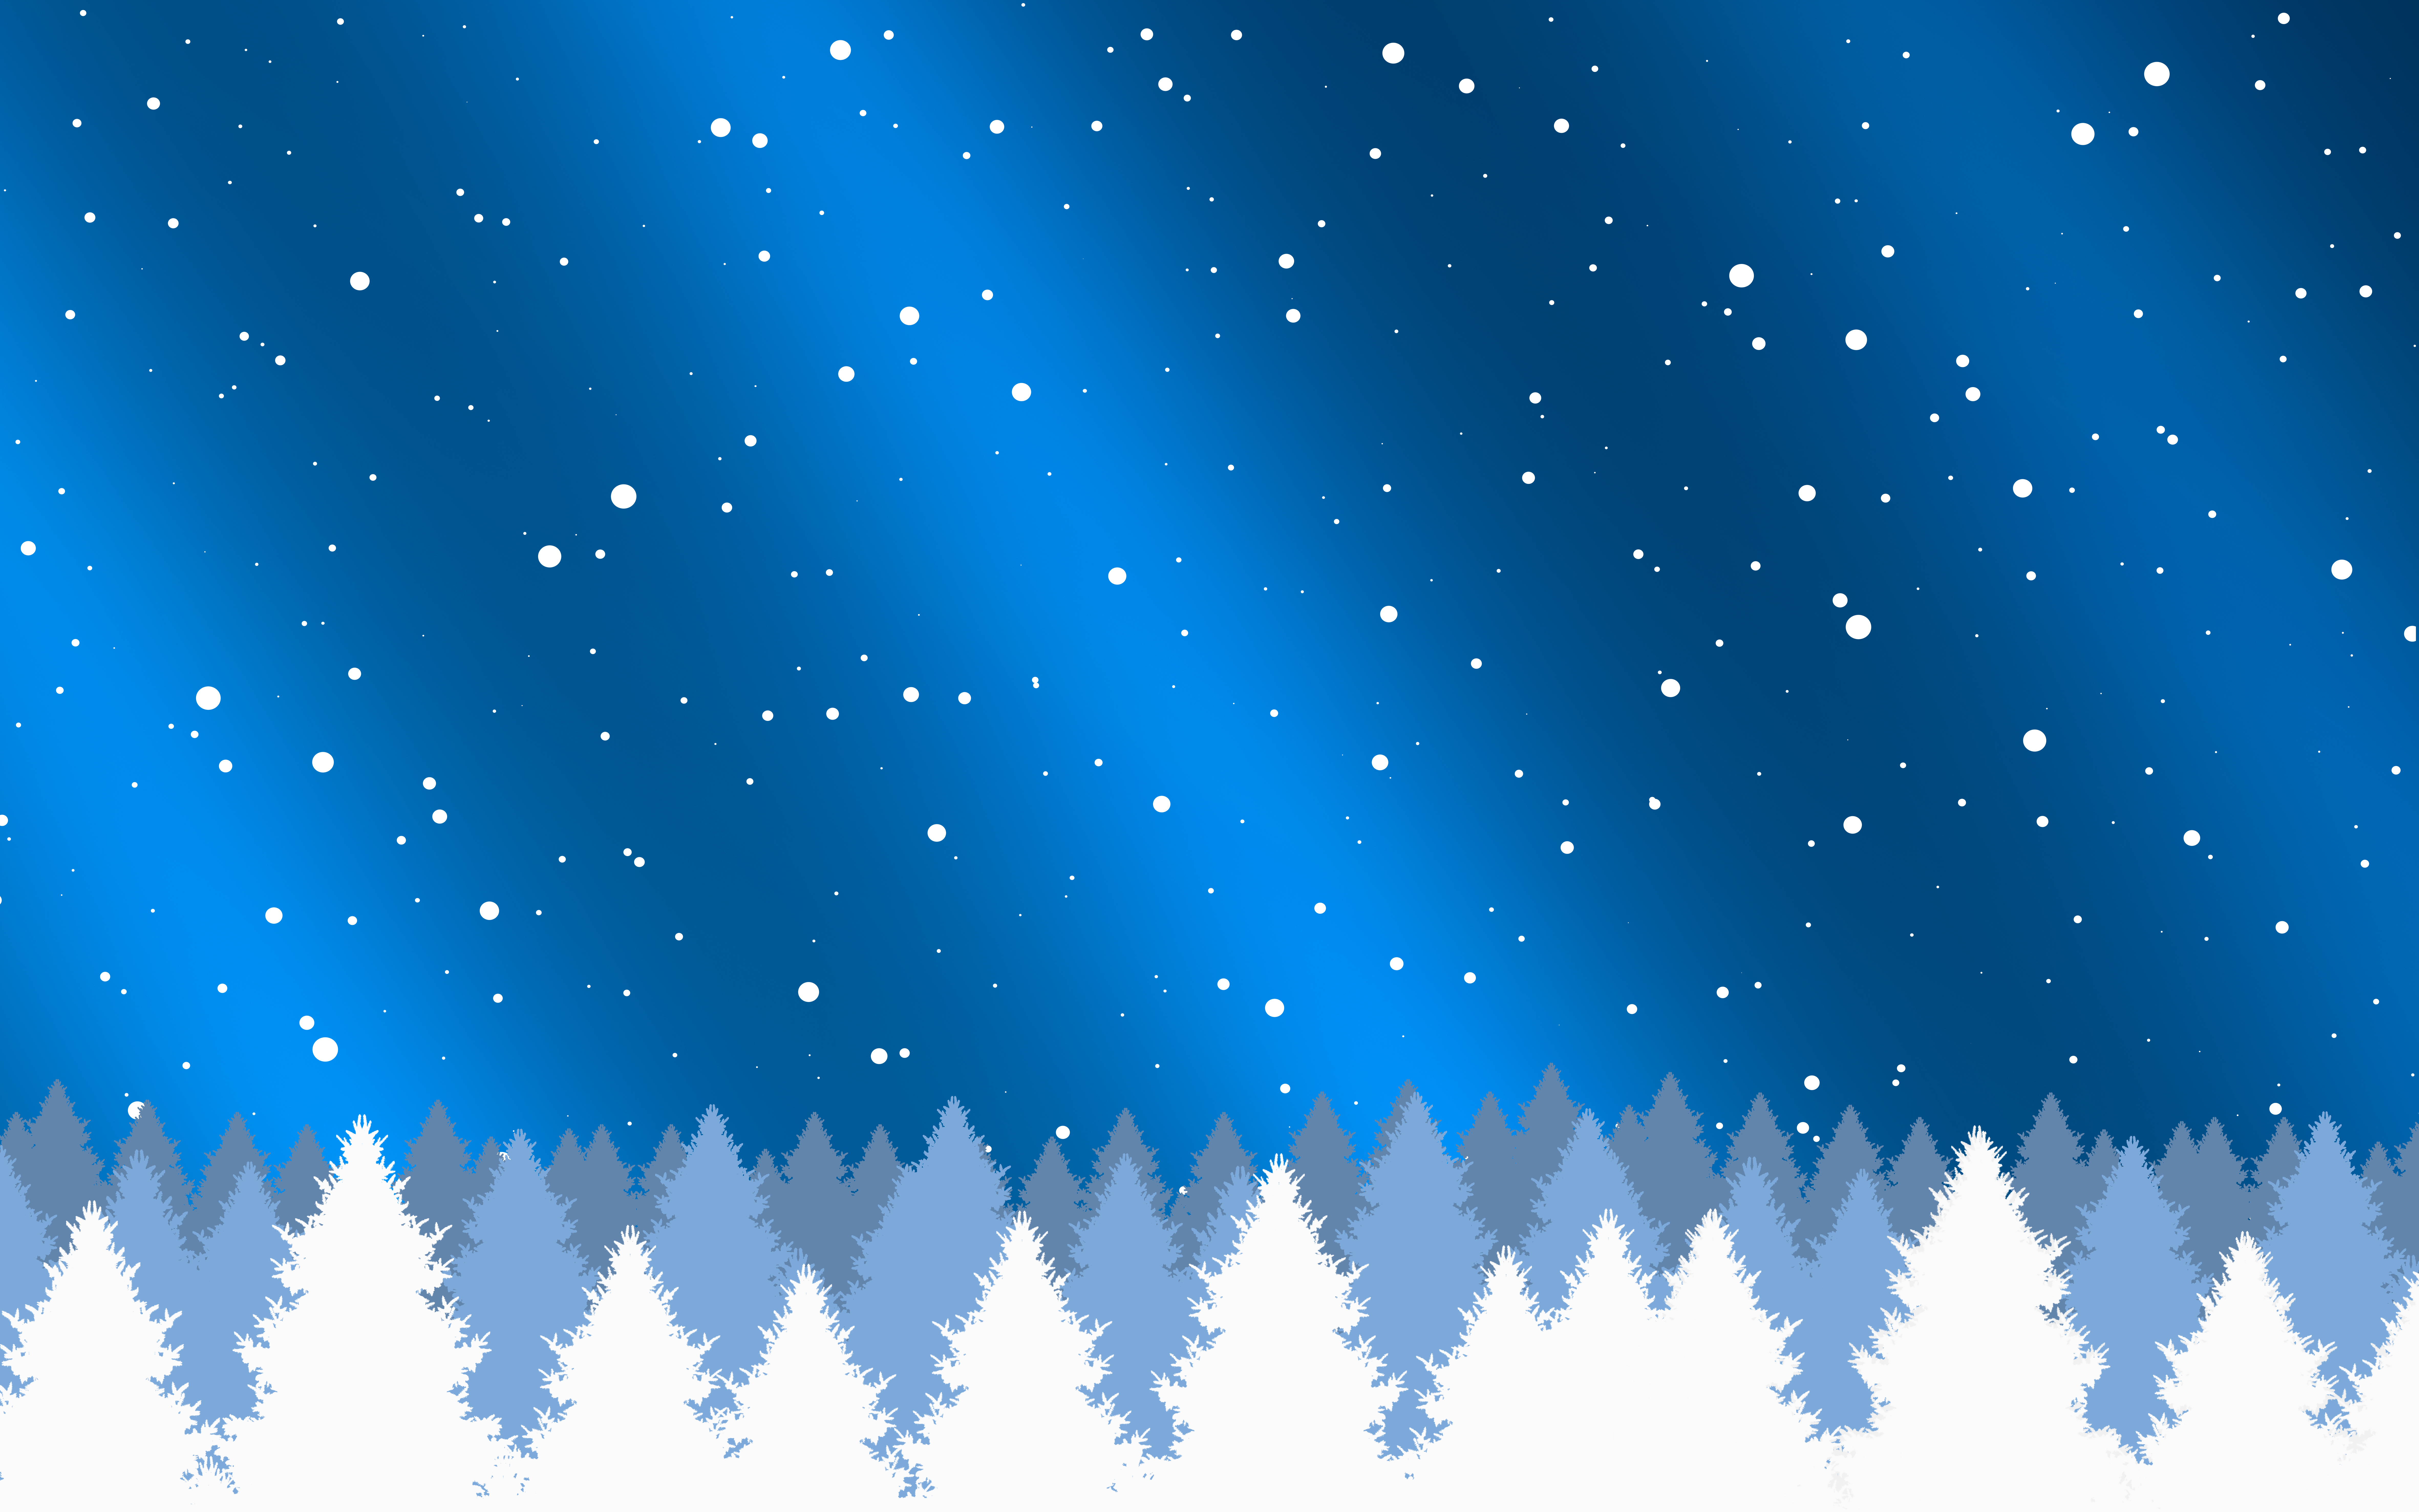 Horizontal white trees and falling snow on blue light gradient border background